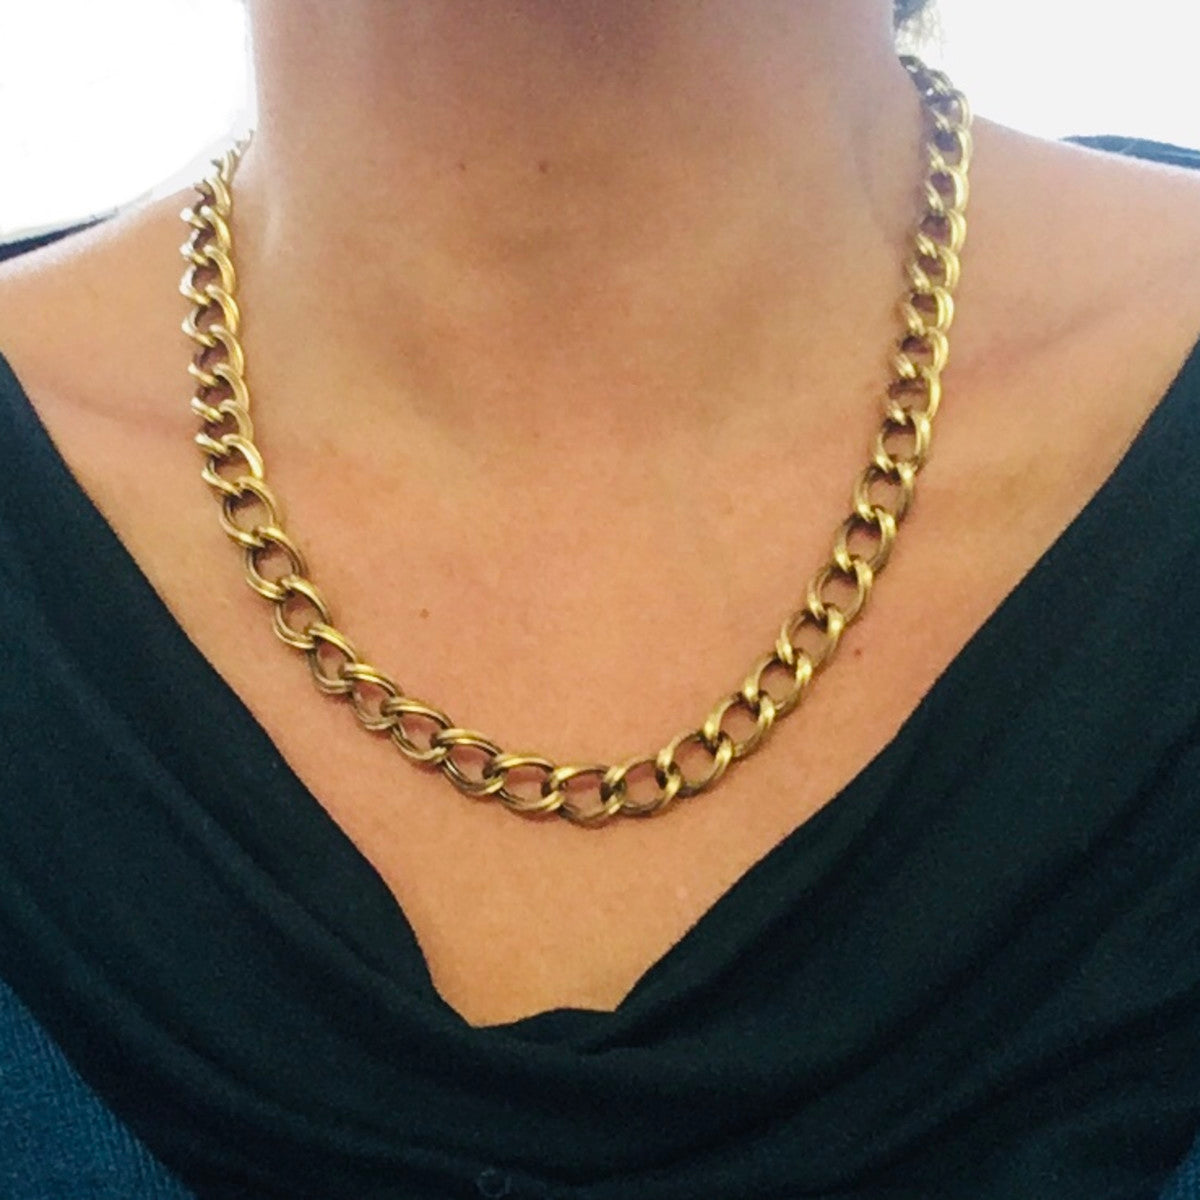 Antique 18KT Yellow Gold Chain Link Necklace worn on neck